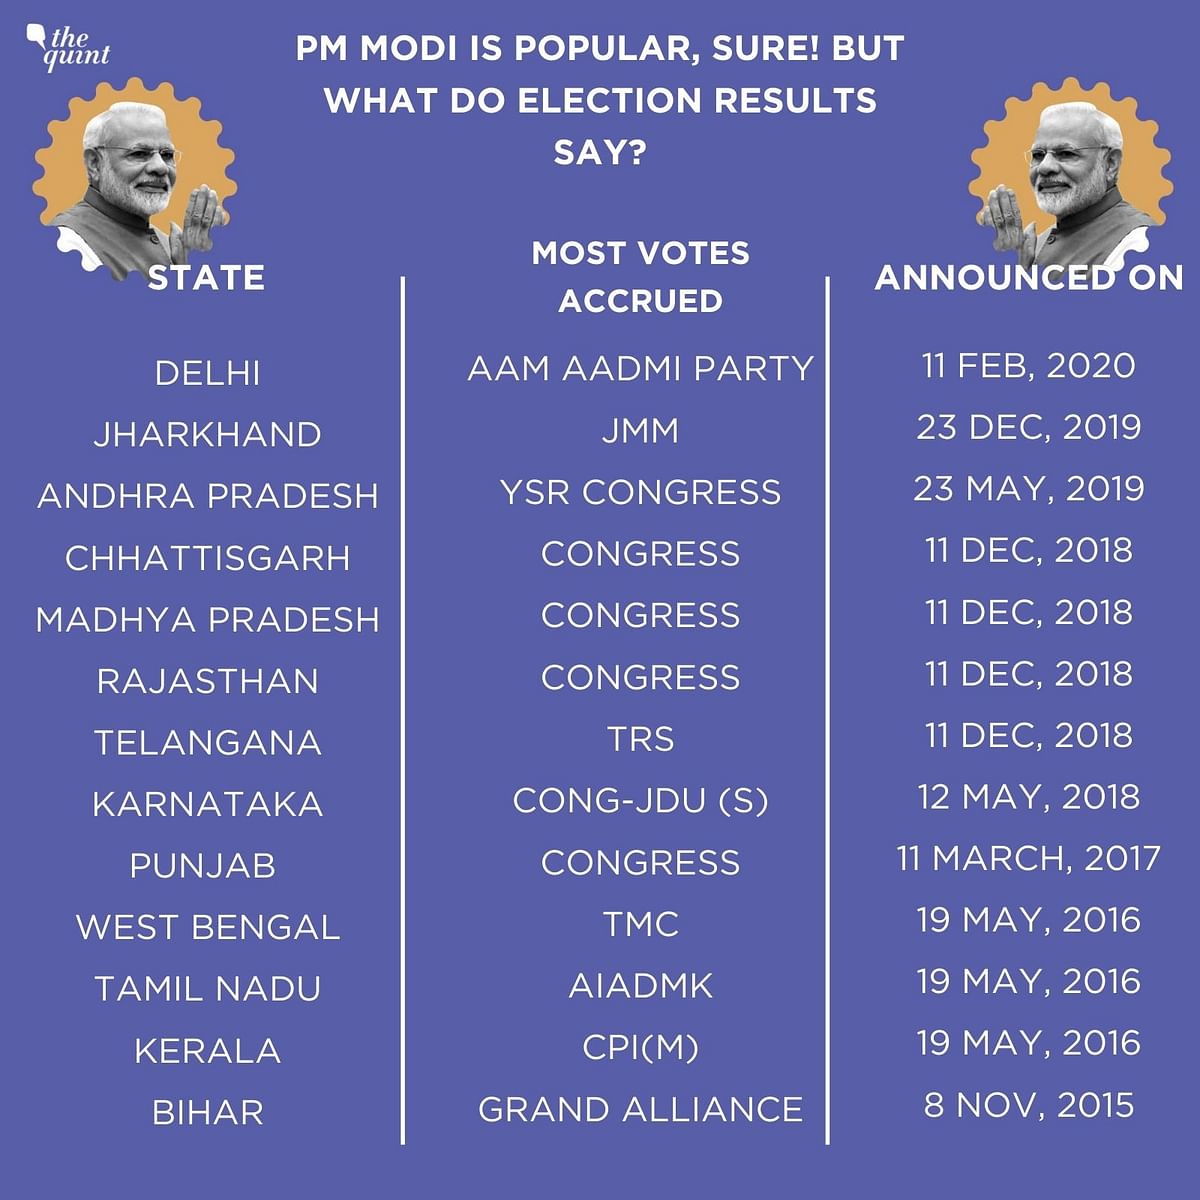 Periodic surveys and TV news channels have been saying that PM Modi’s popularity is still intact. But is it really?